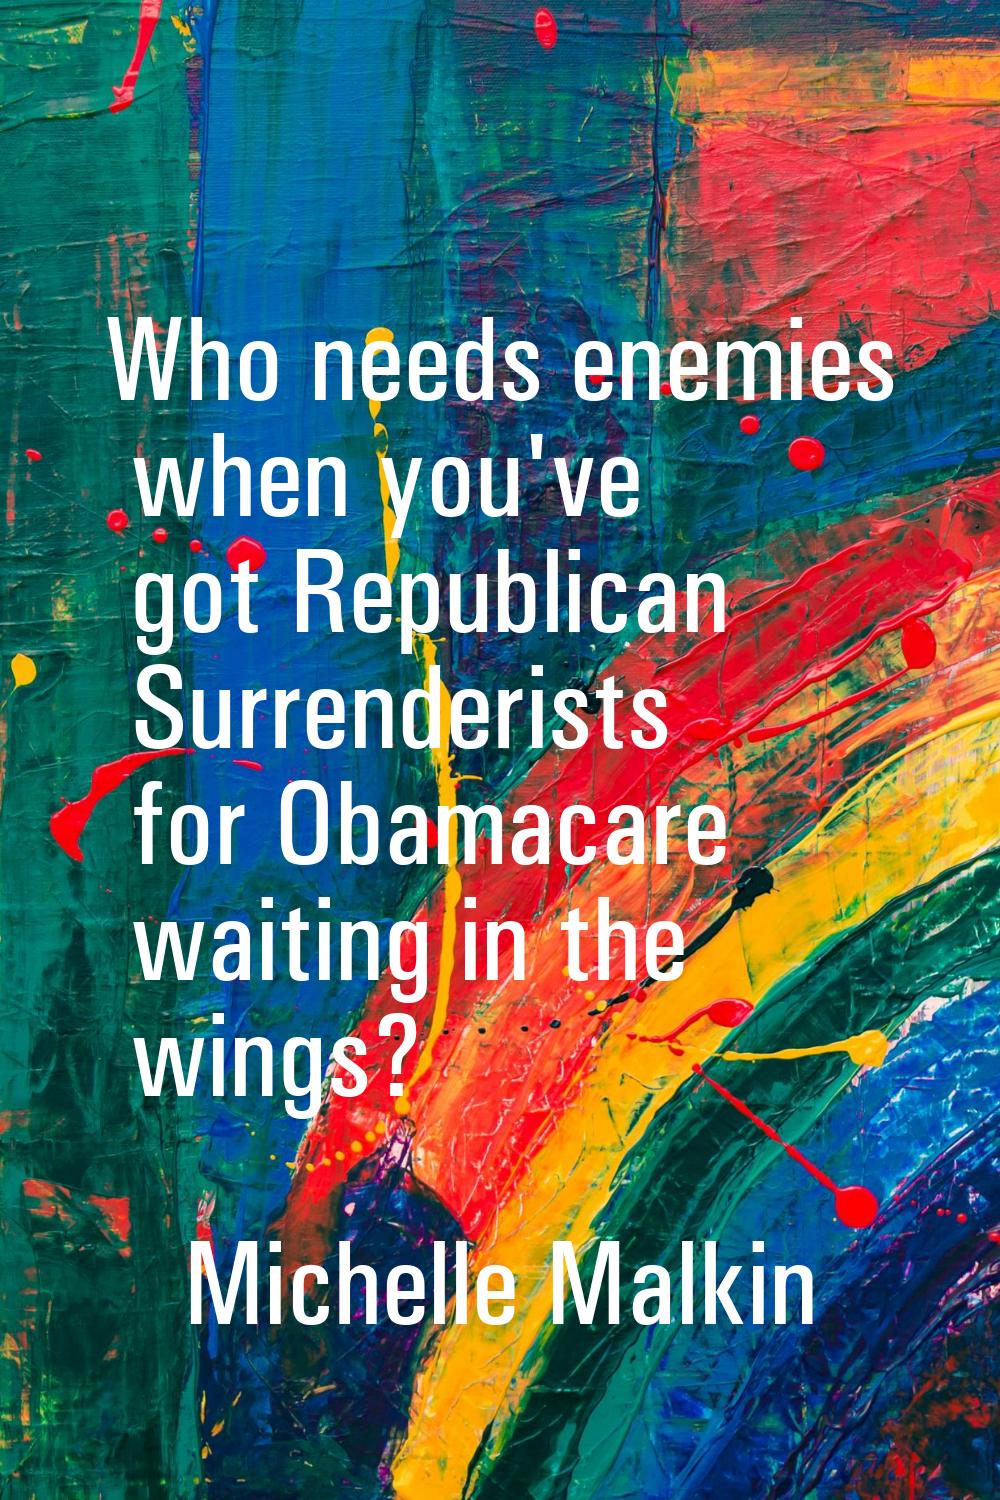 Who needs enemies when you've got Republican Surrenderists for Obamacare waiting in the wings?